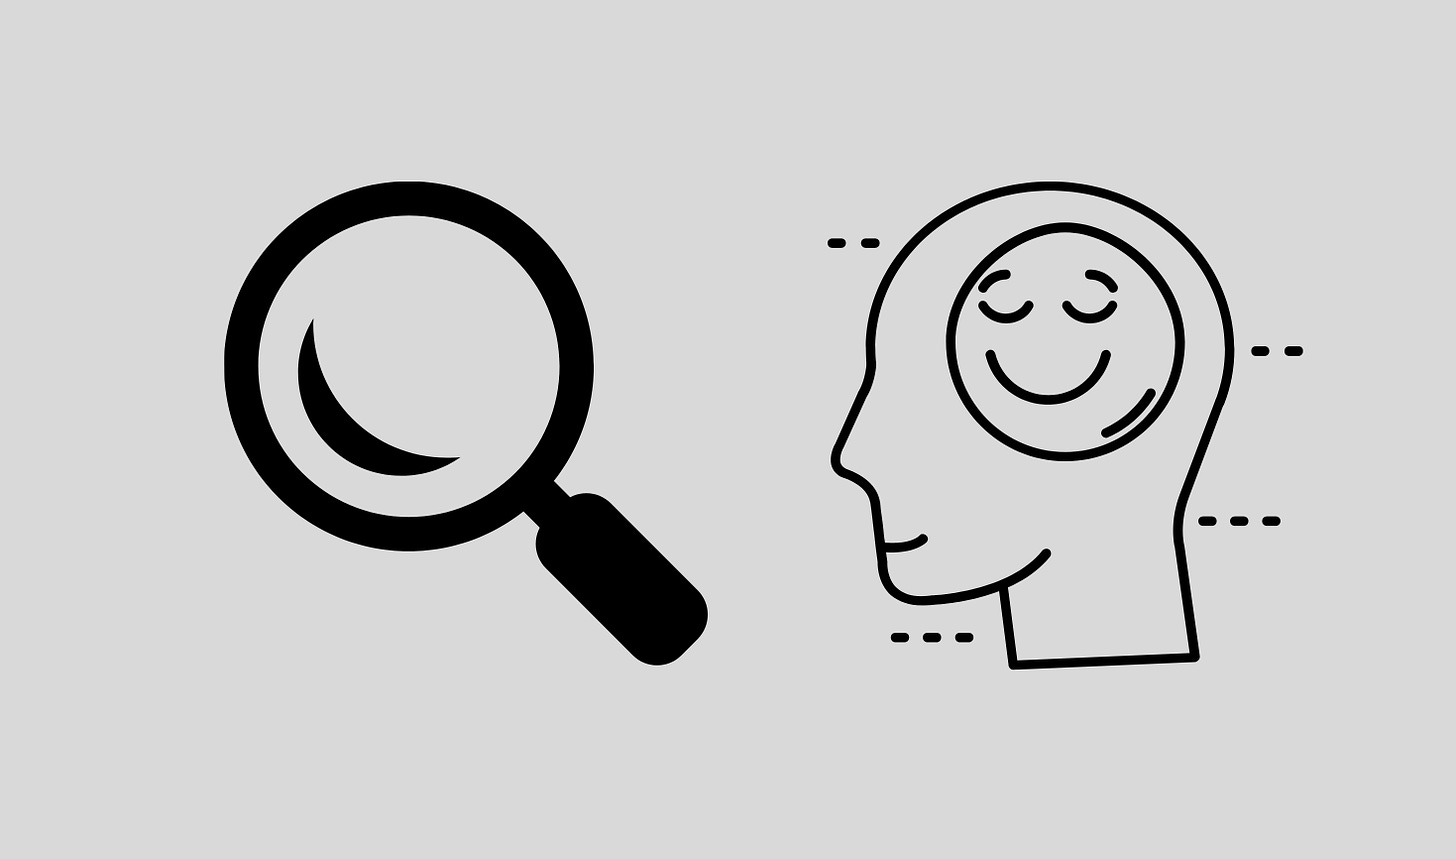 On the left a graphic of a magnifying glass and on the right a graphic of a head with a smiley face for a brain.